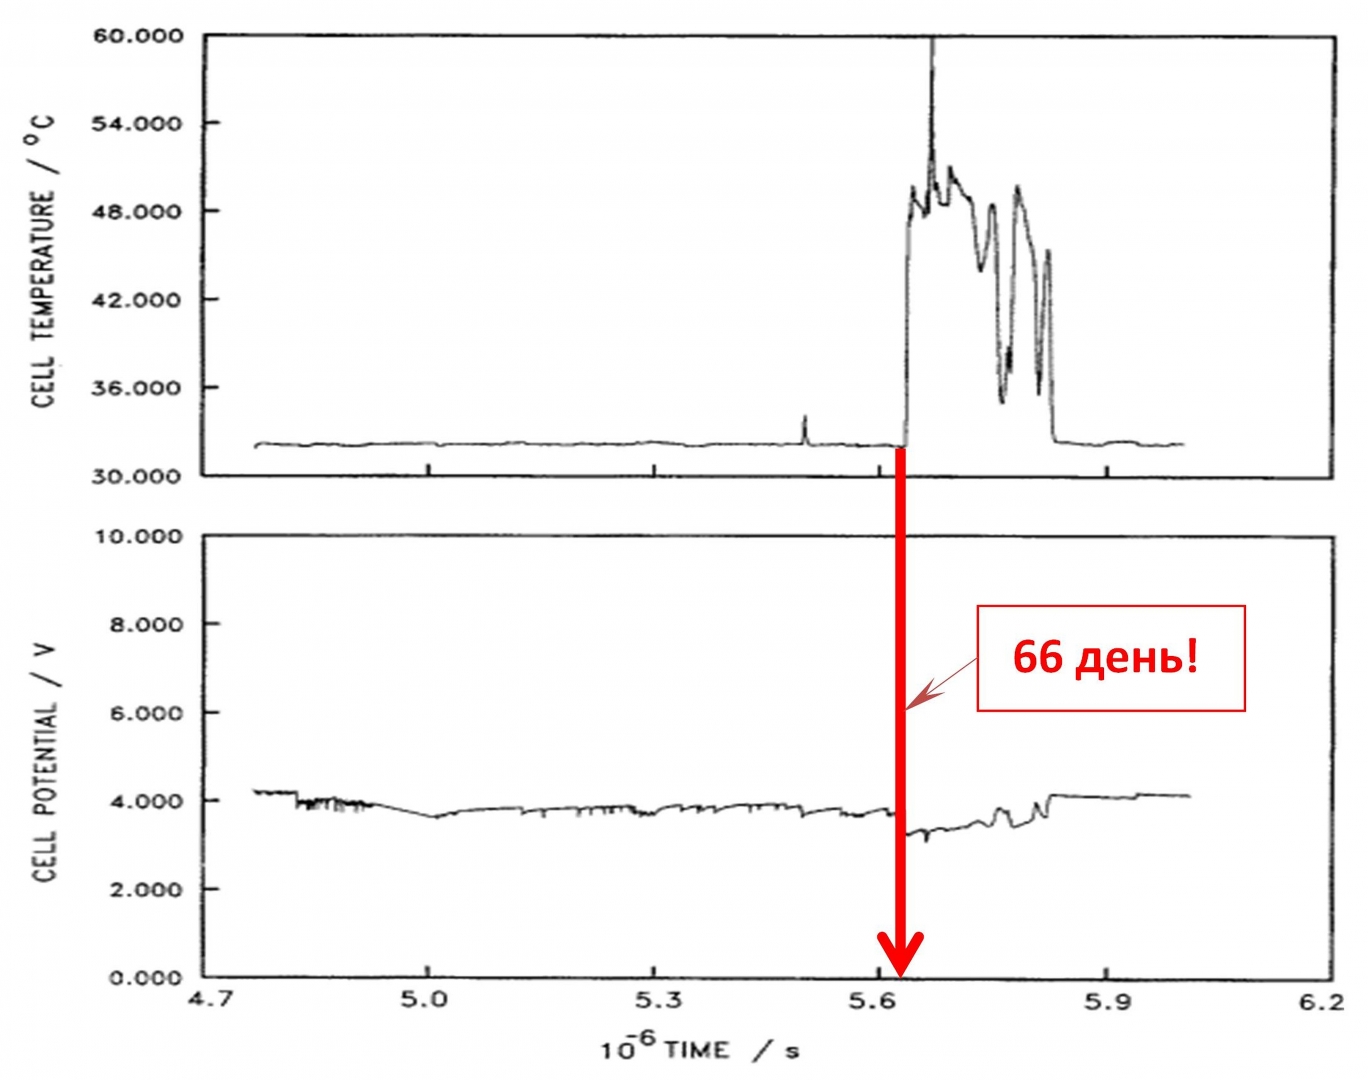 Fig. 8A. Cell temperature vs. time (upper) and cell potential vs. time (lower) plots for a 0.4×1.25 cm Pd rod electrode in 0.1 M LiOD solution. Current density 64 mA cm-2, bath temperature 29.87ºC